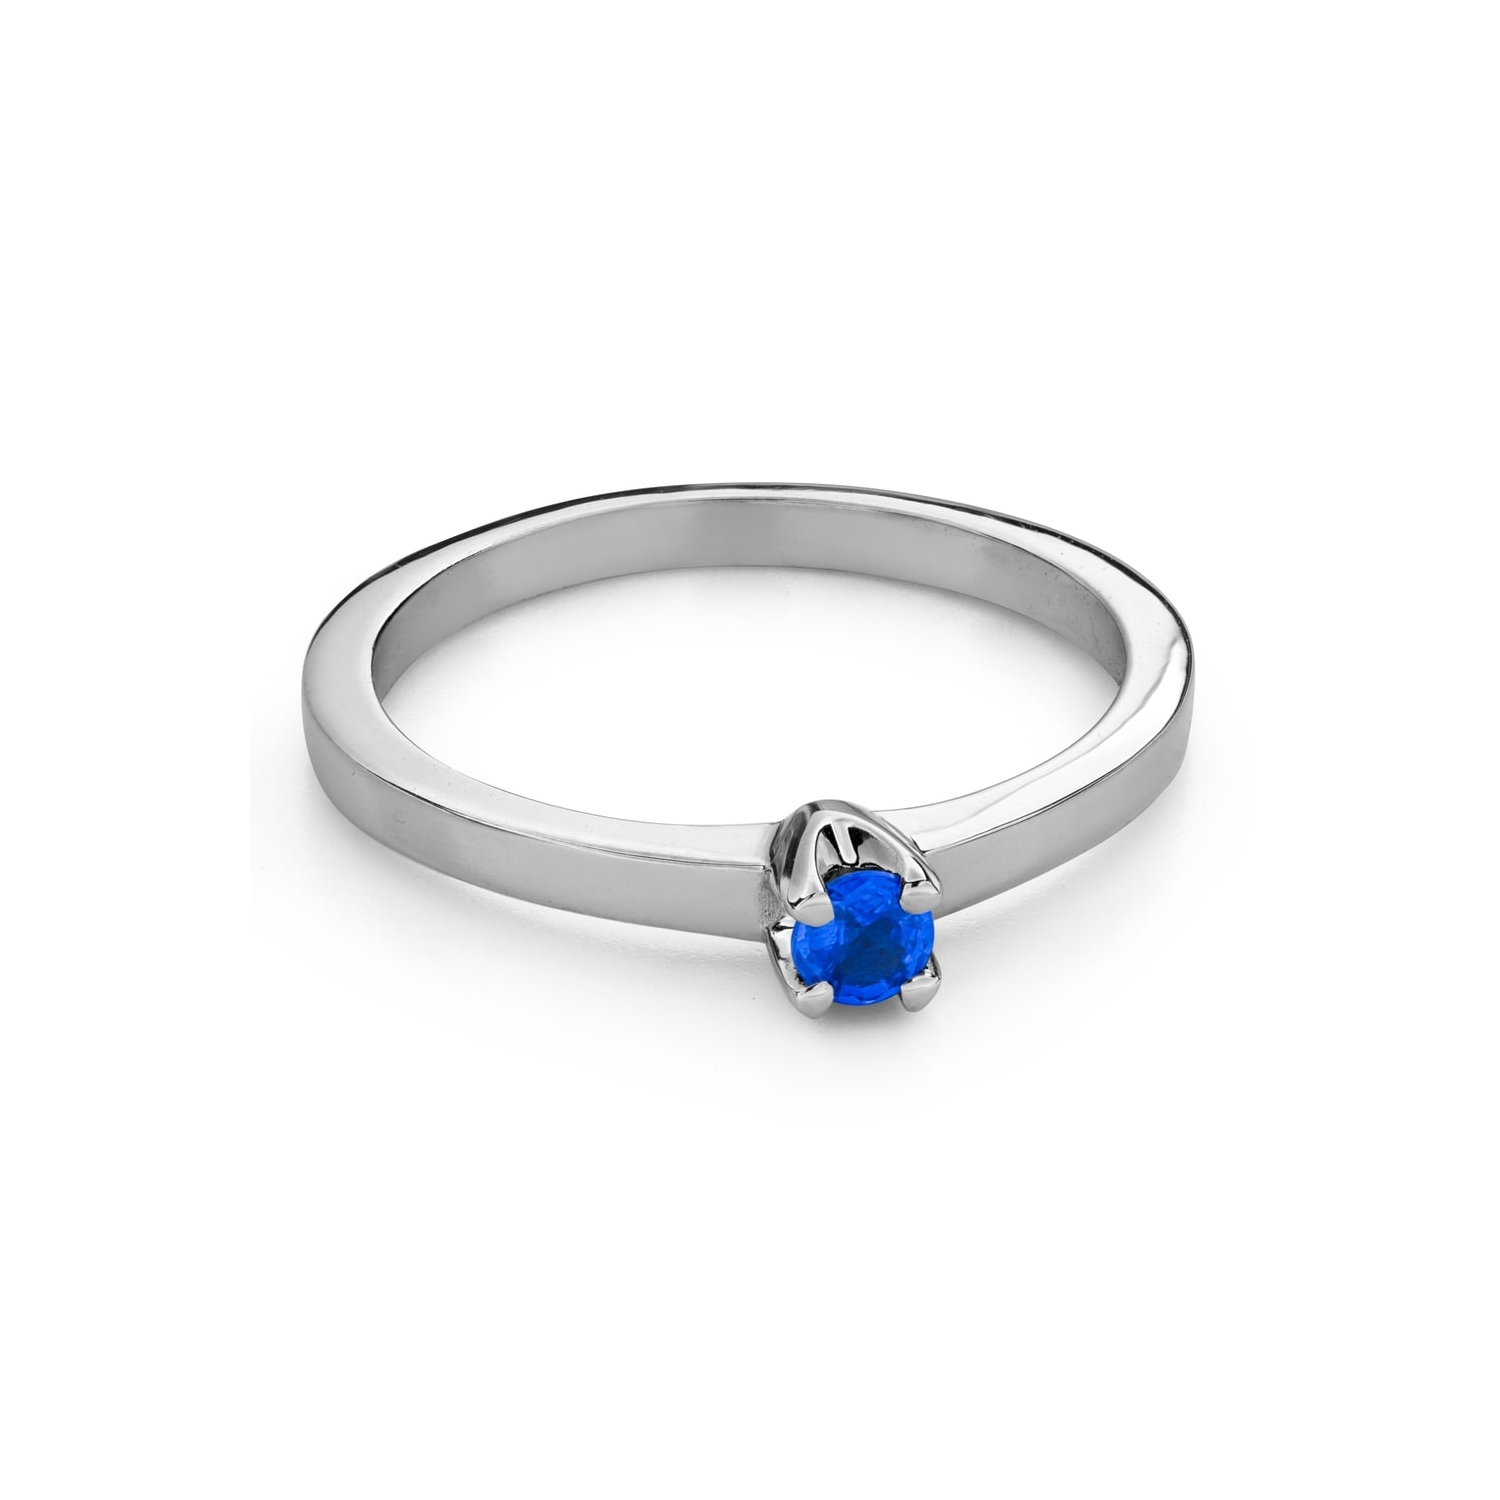 Engagement ring with gemstones "Sapphire 56"